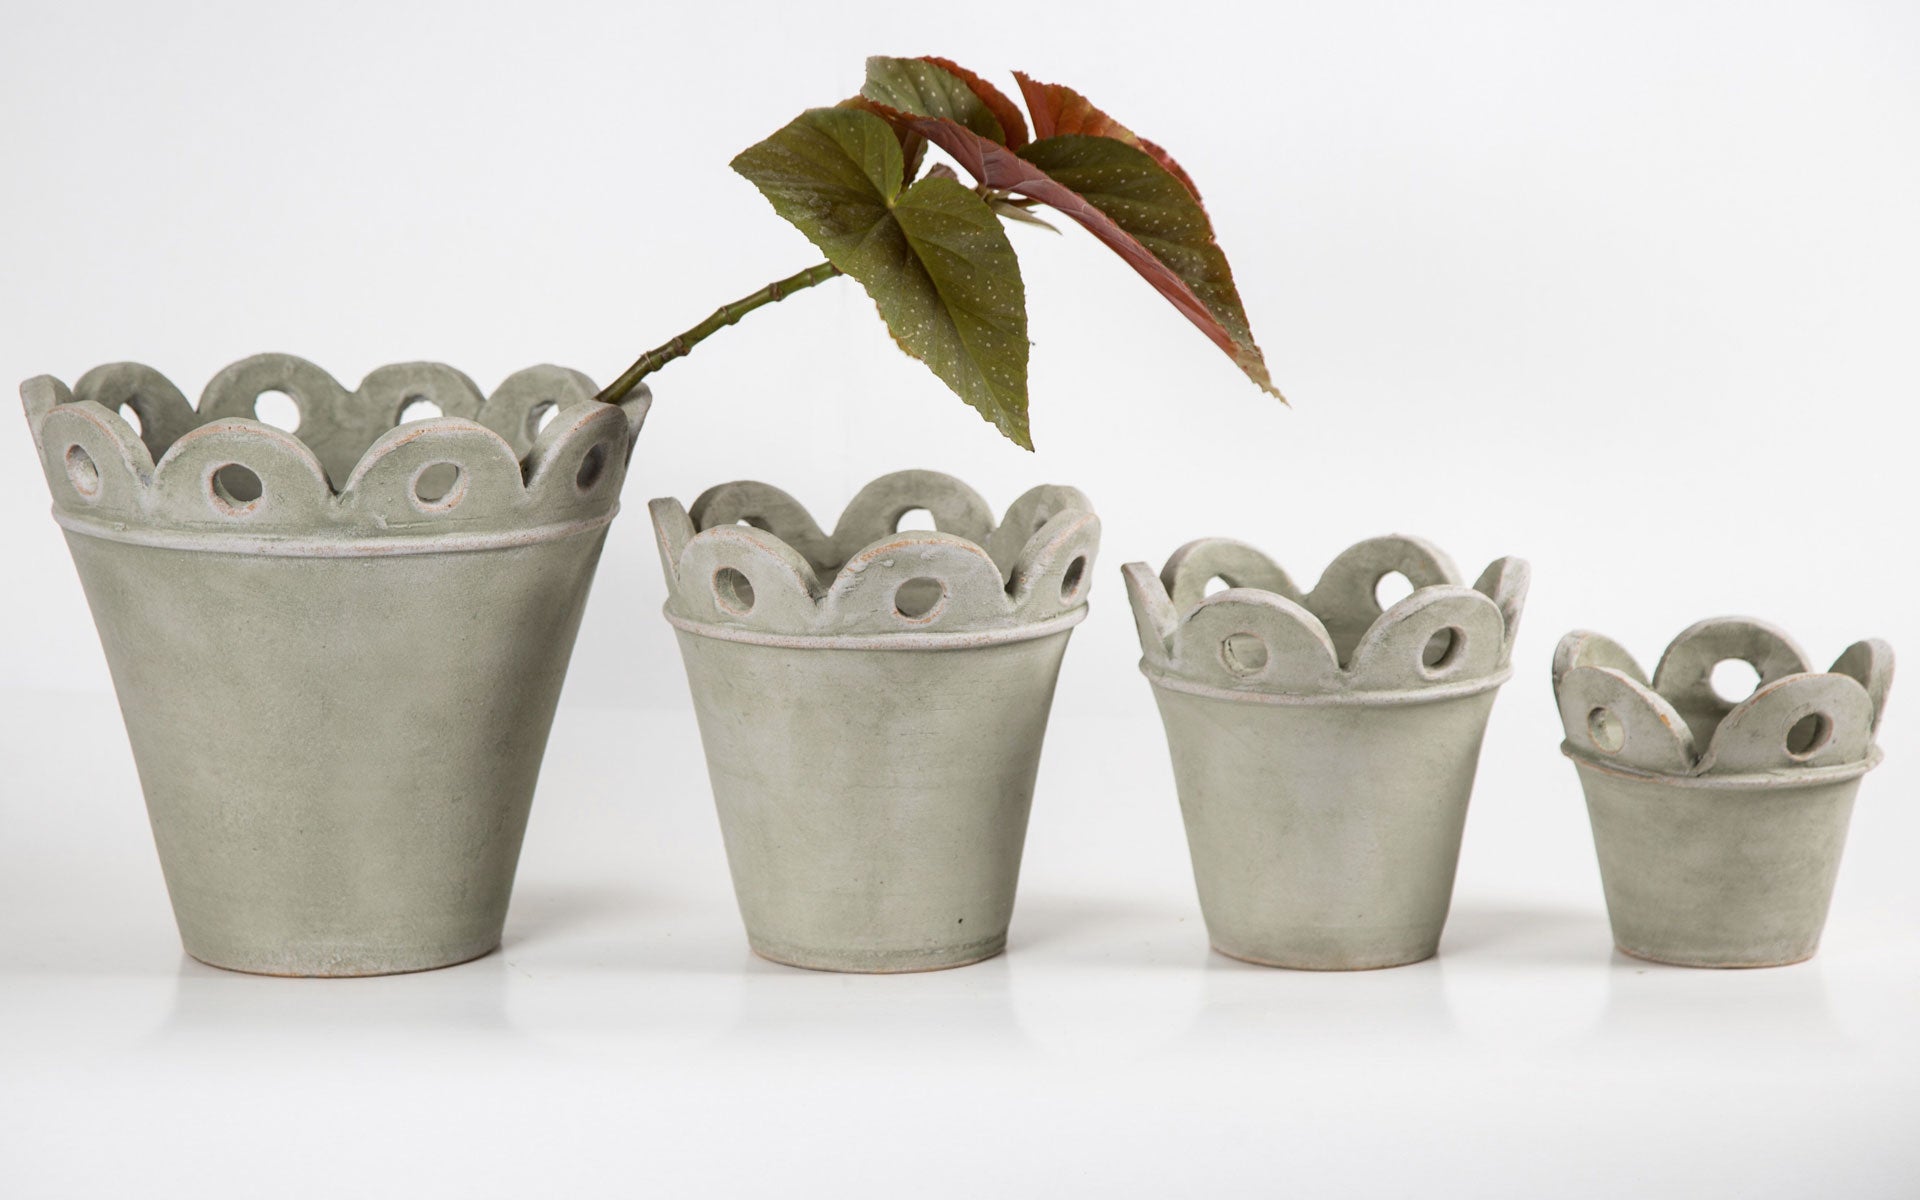 Showing the four (4) sizes of Court Pendu pots in moss grey